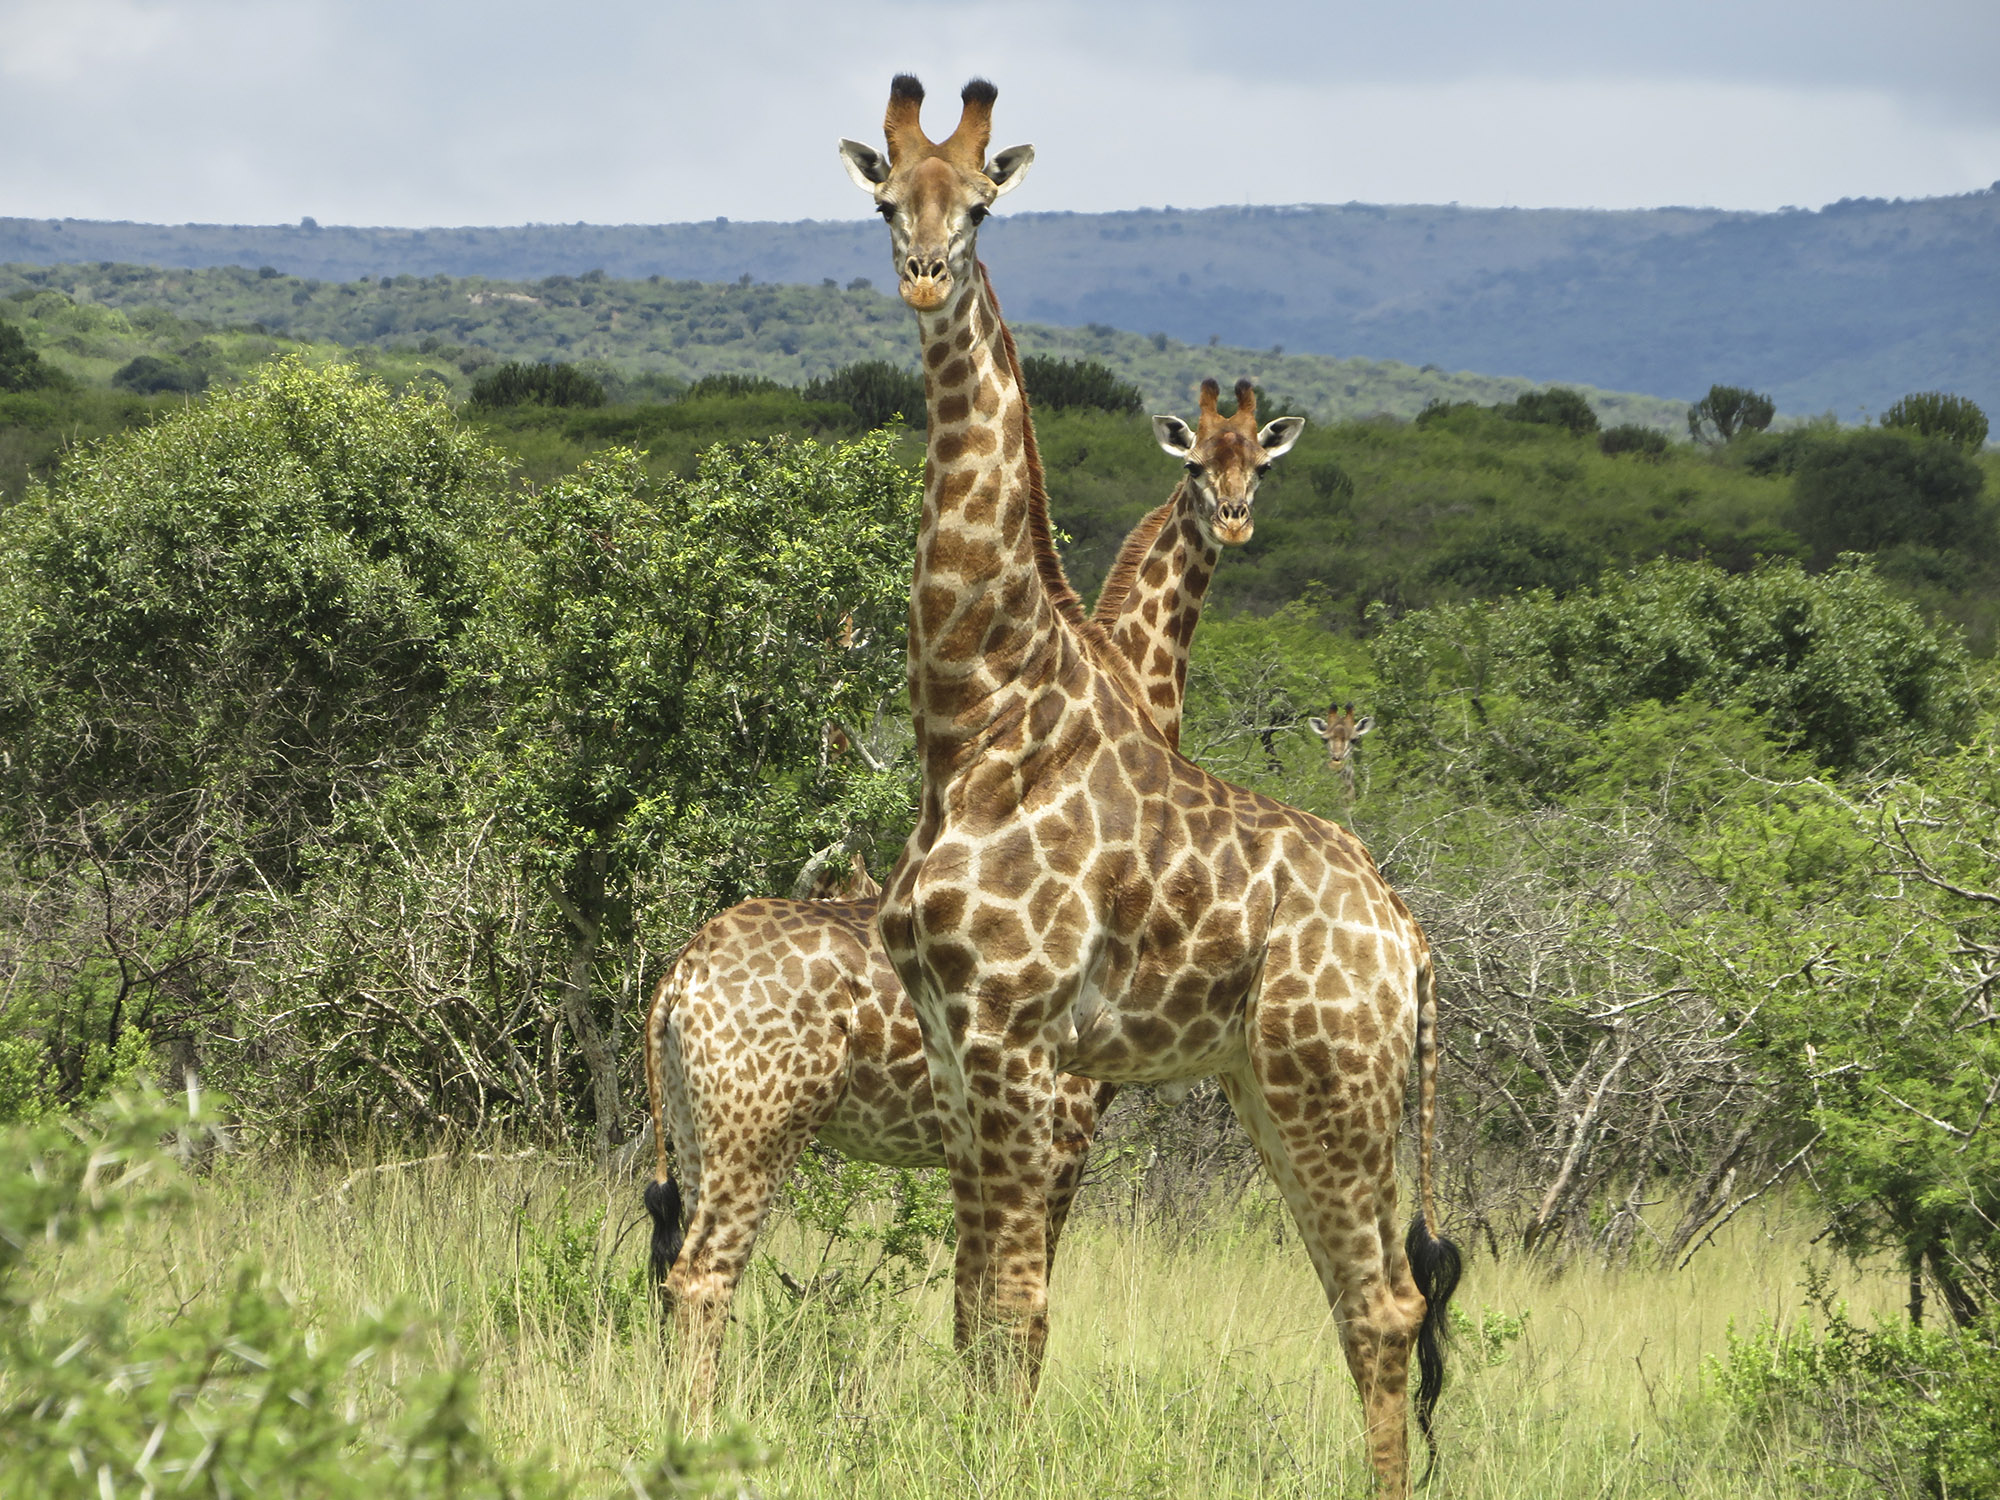 Mawana Game Reserve is rich in wildlife 2